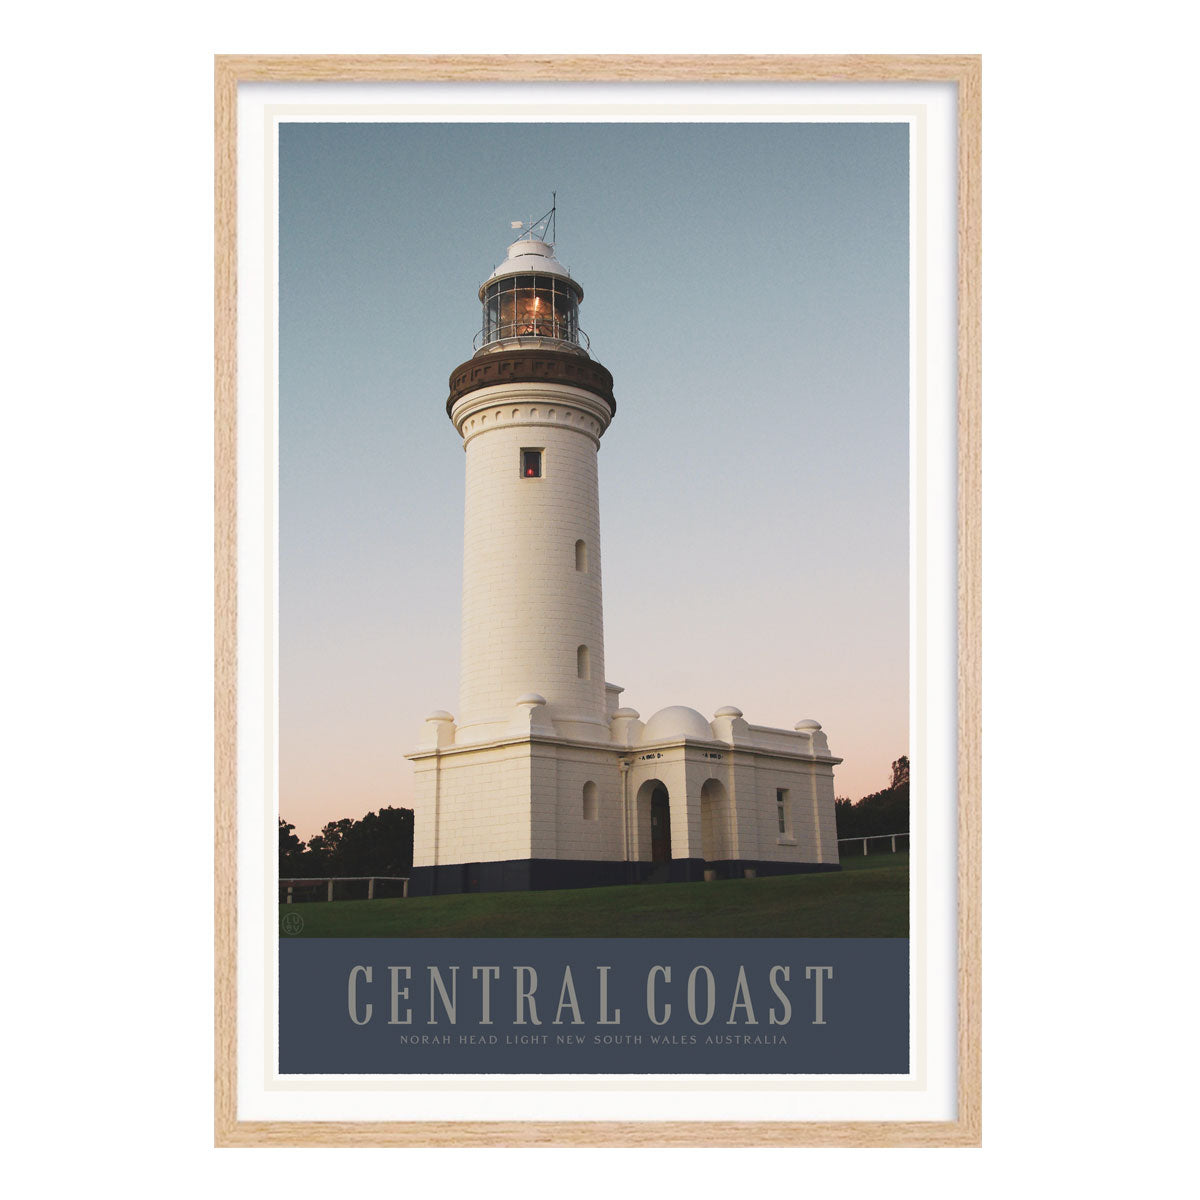 Norah Head Central Coast NSW retro vintage poster print in oak frame from Places We Luv